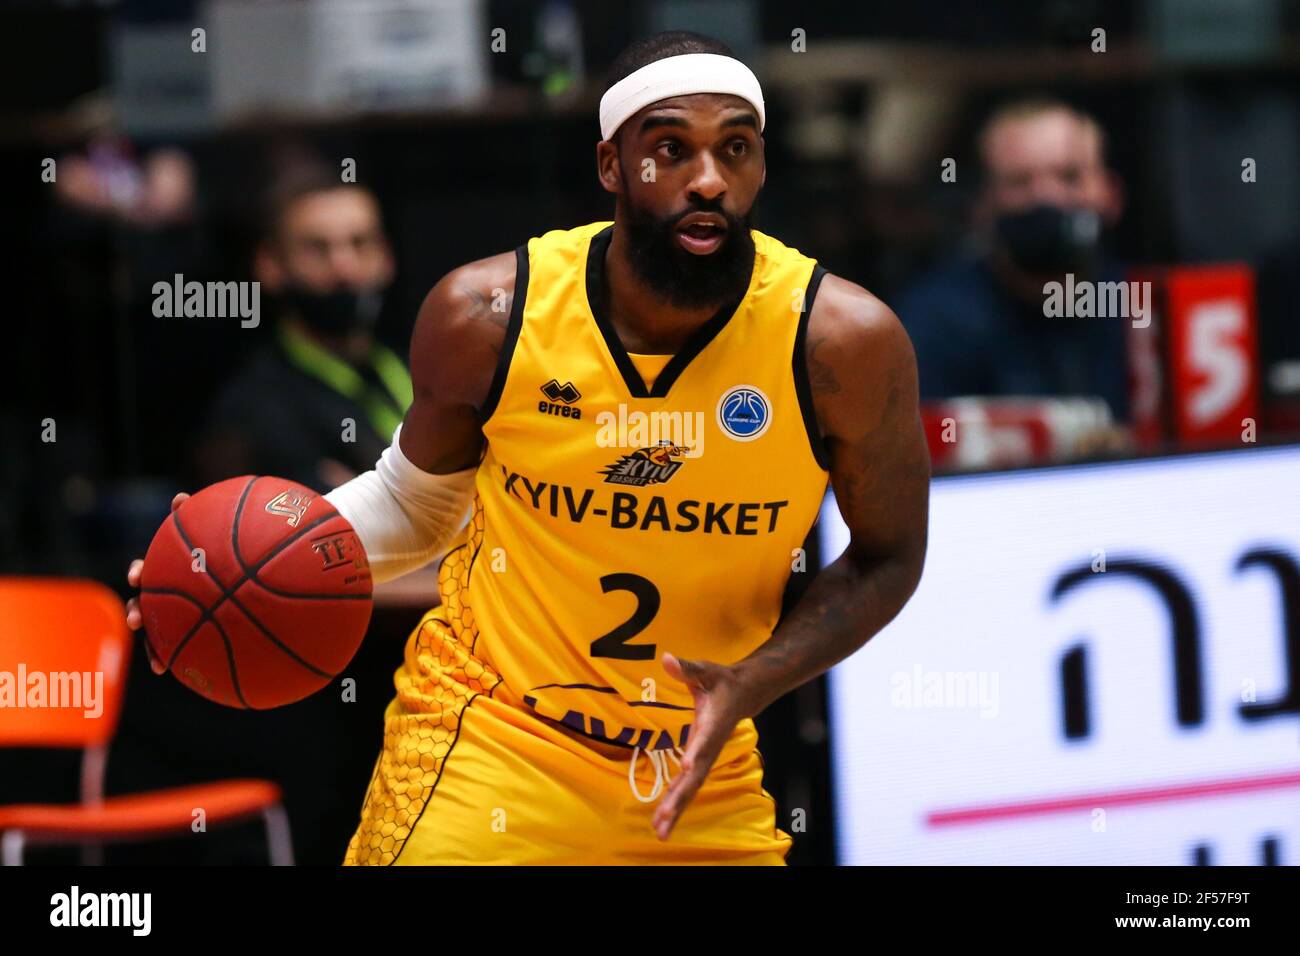 DEN BOSCH, NETHERLANDS - MARCH 24: Bruce Anthony Massey JR of BC Kyiv Basket  during the Fiba Europe Cup game between Ironi Ness Ziona and BC Kyiv Basket  at Maaspoort on March